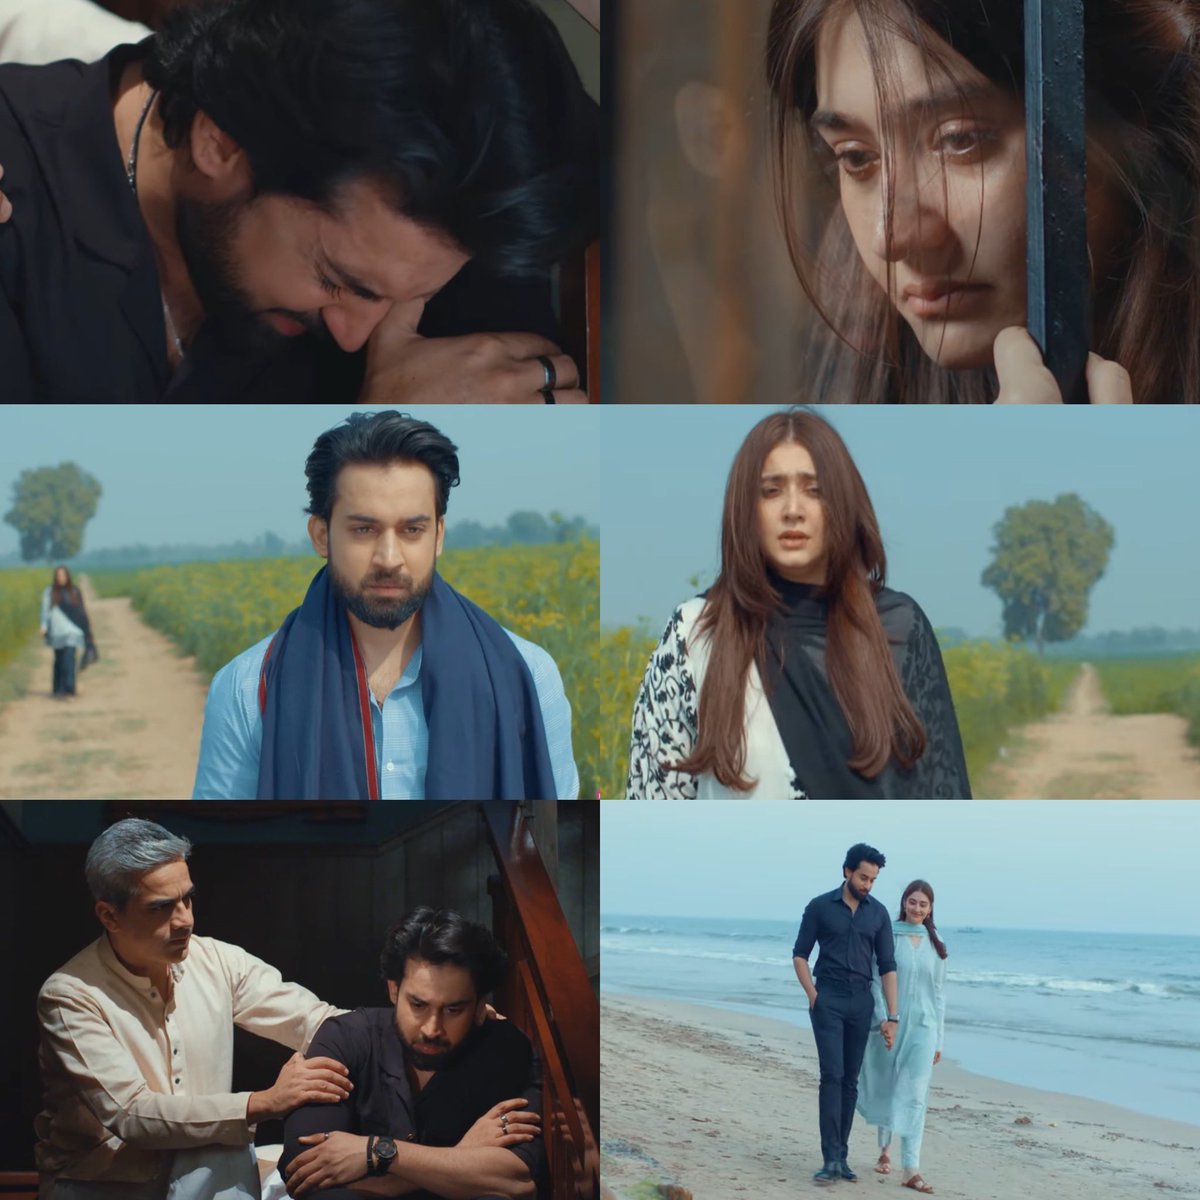 Would love to say I was in awe of the finale, but..Let’s discuss the positives first. I absolutely loved #DurefishanSaleem & #OmairRana’s performances. These moments were excellent. #BilalAbbasKhan has always been a star & shut down naysayers with #IshqMurshid . #PakistaniDramas